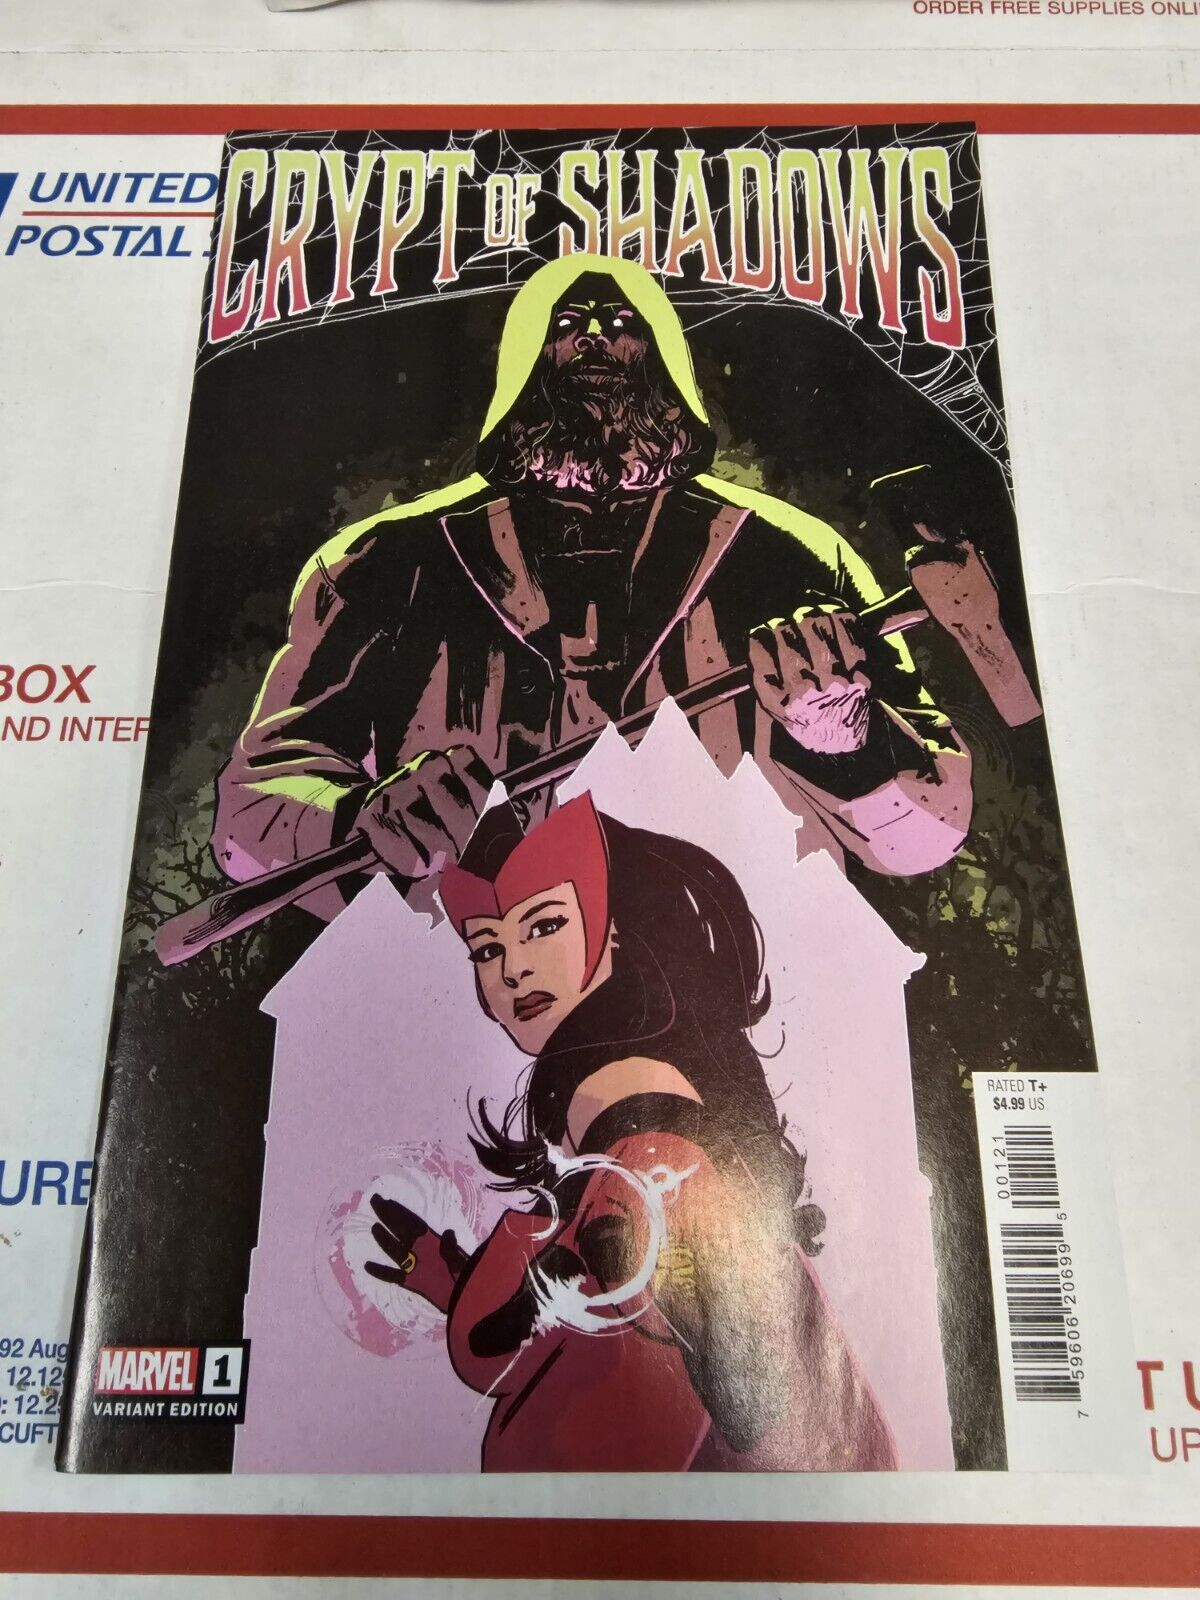 CRYPT OF SHADOWS #1 VARIANT MARVEL COMICS 2023 NM- OR BETTER 